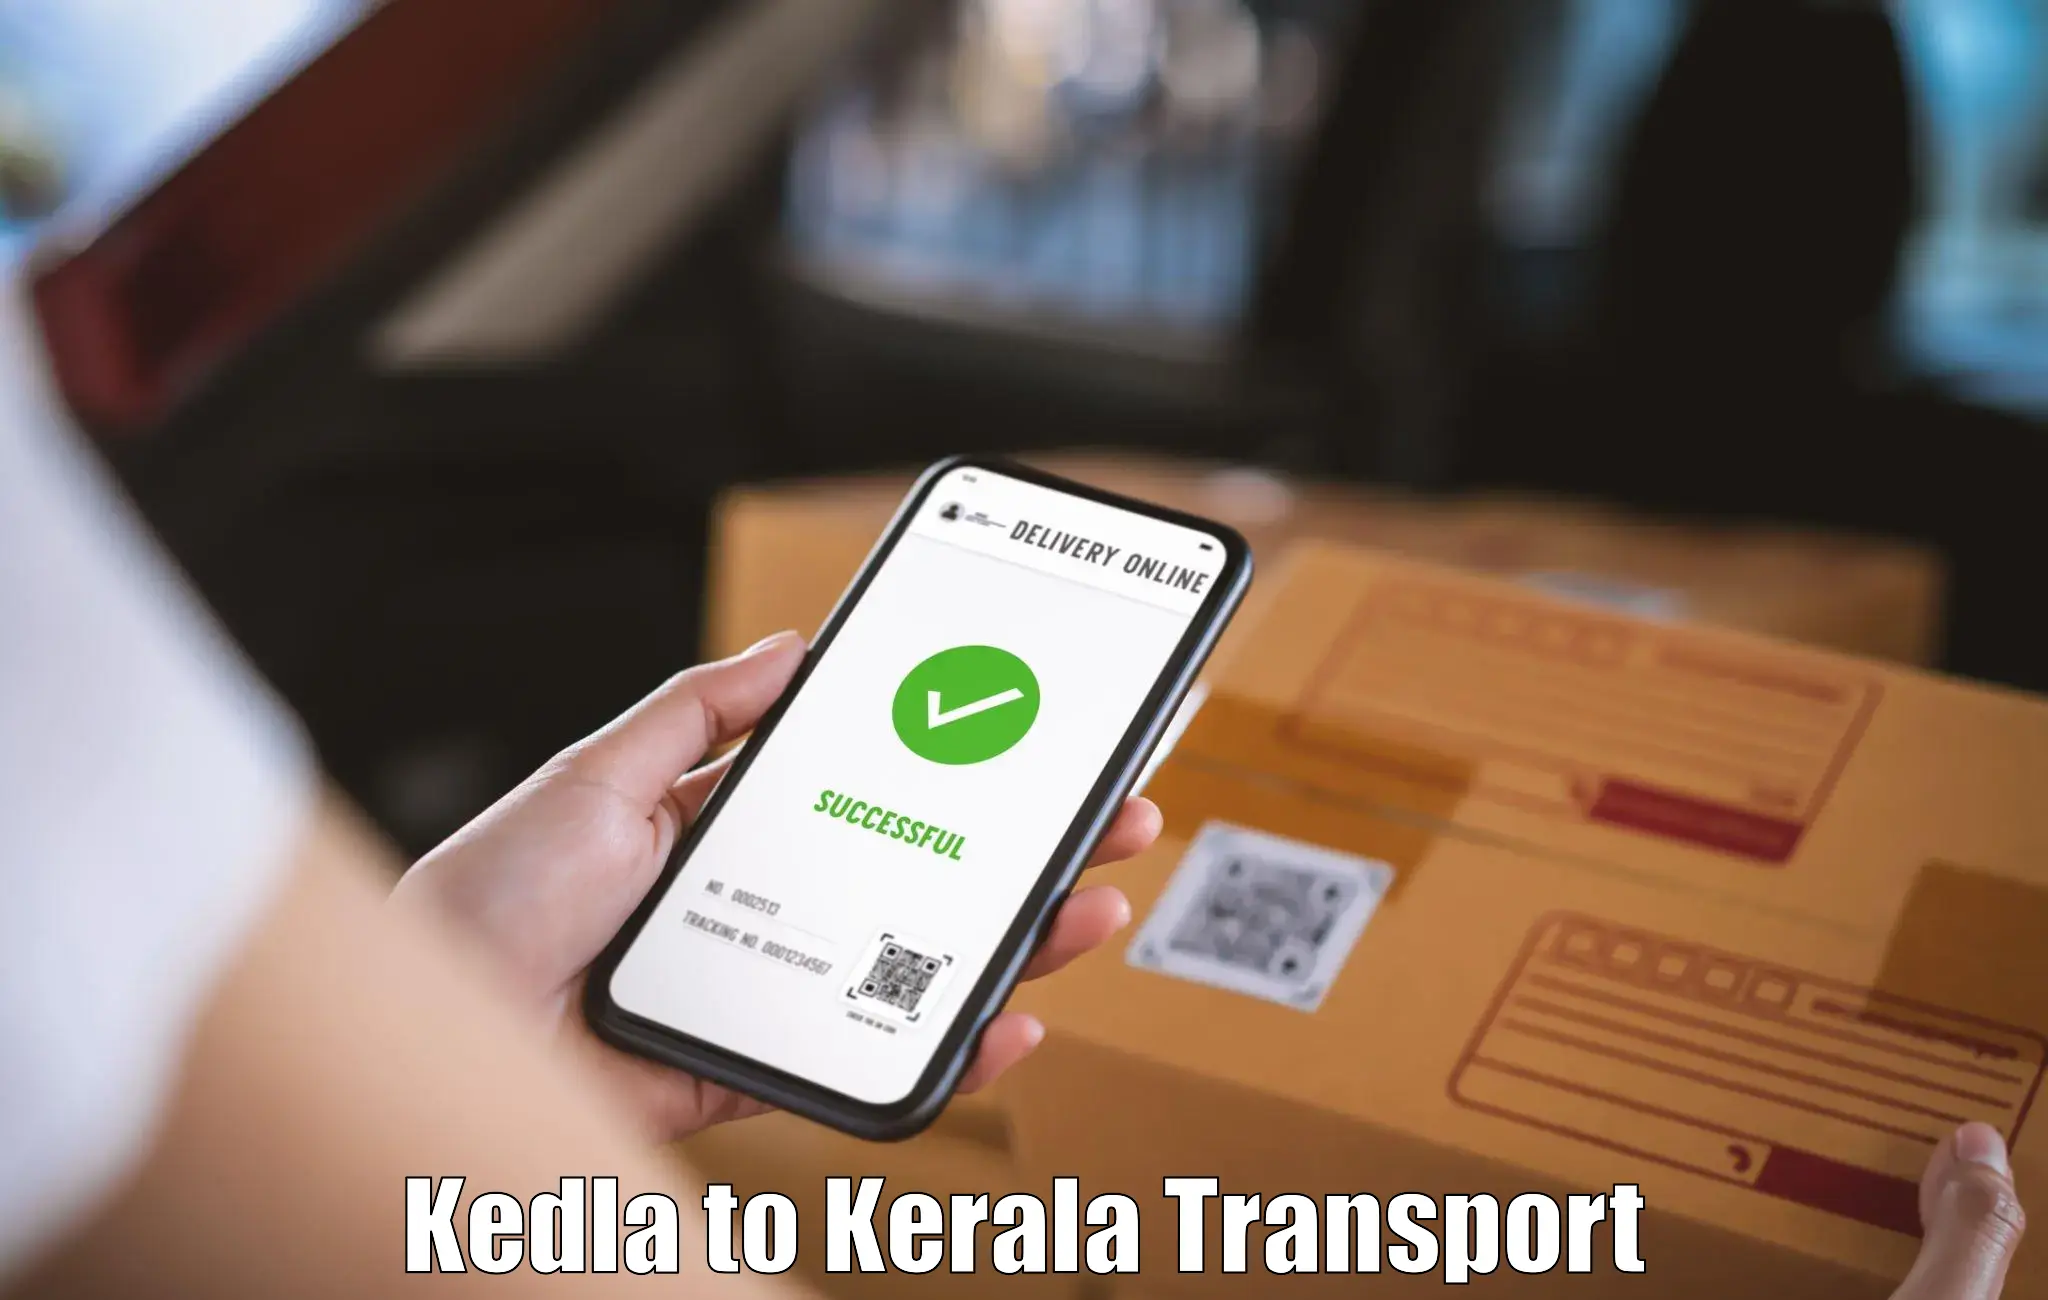 Truck transport companies in India Kedla to Cochin